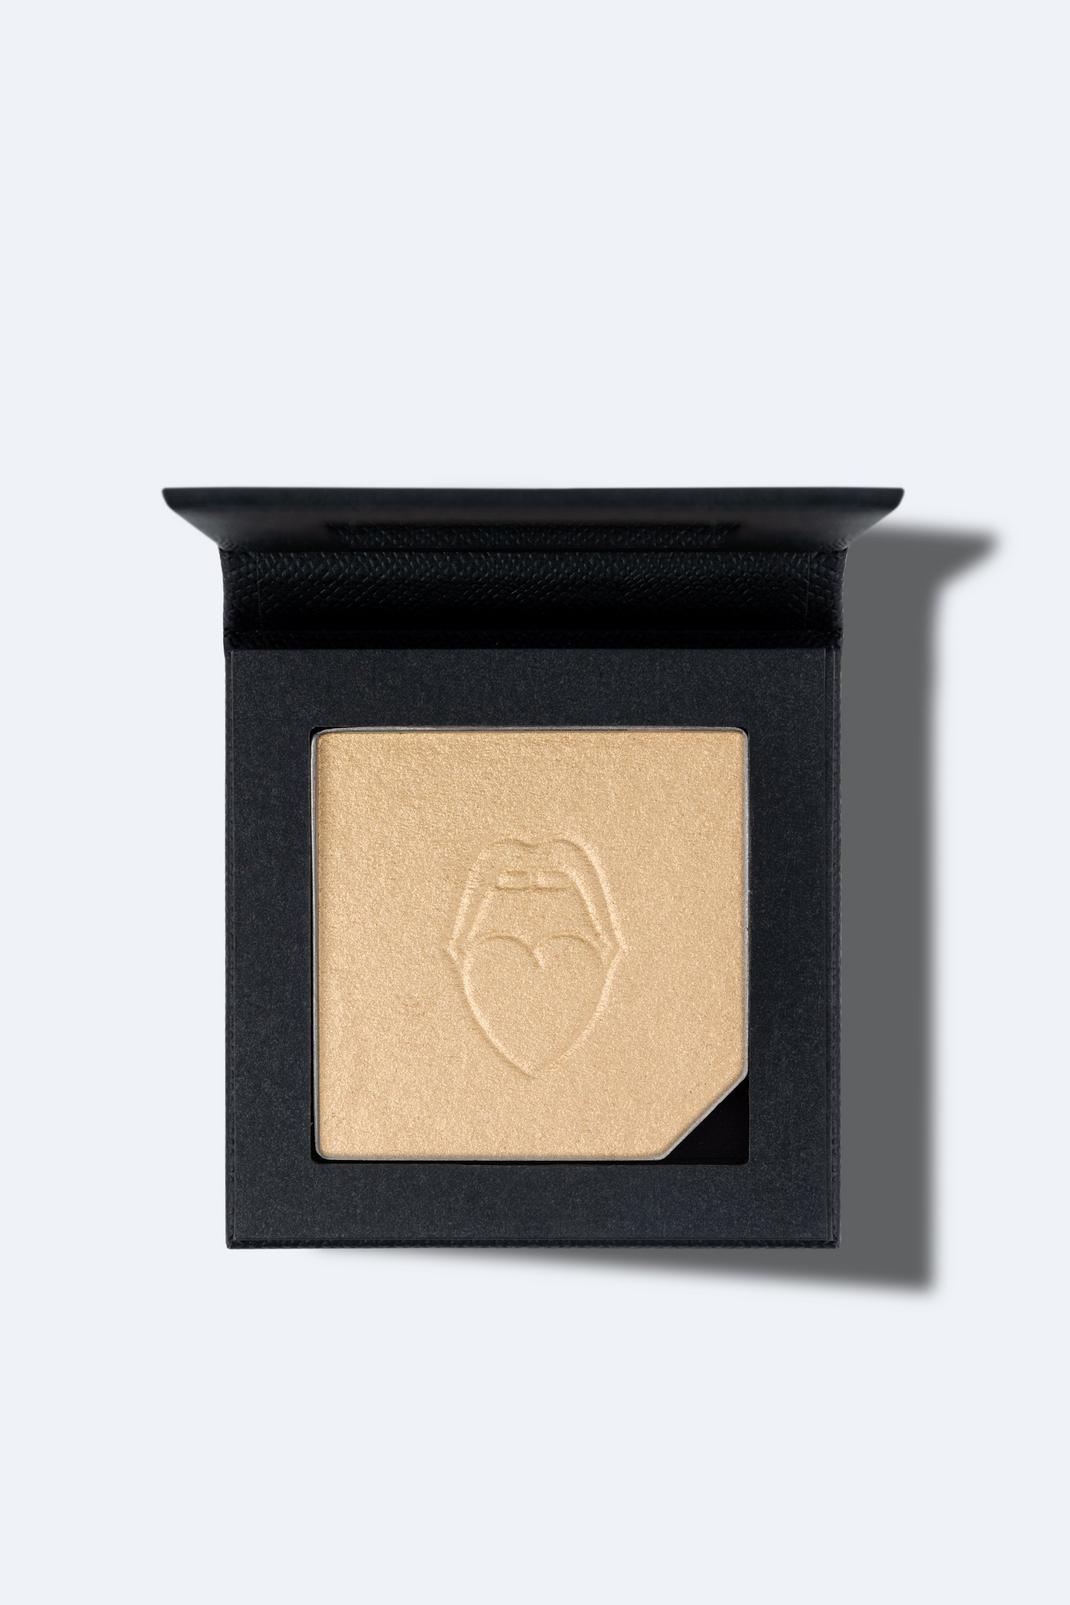 Nasty Gal Beauty - Highlighter en poudre, Champagne image number 1